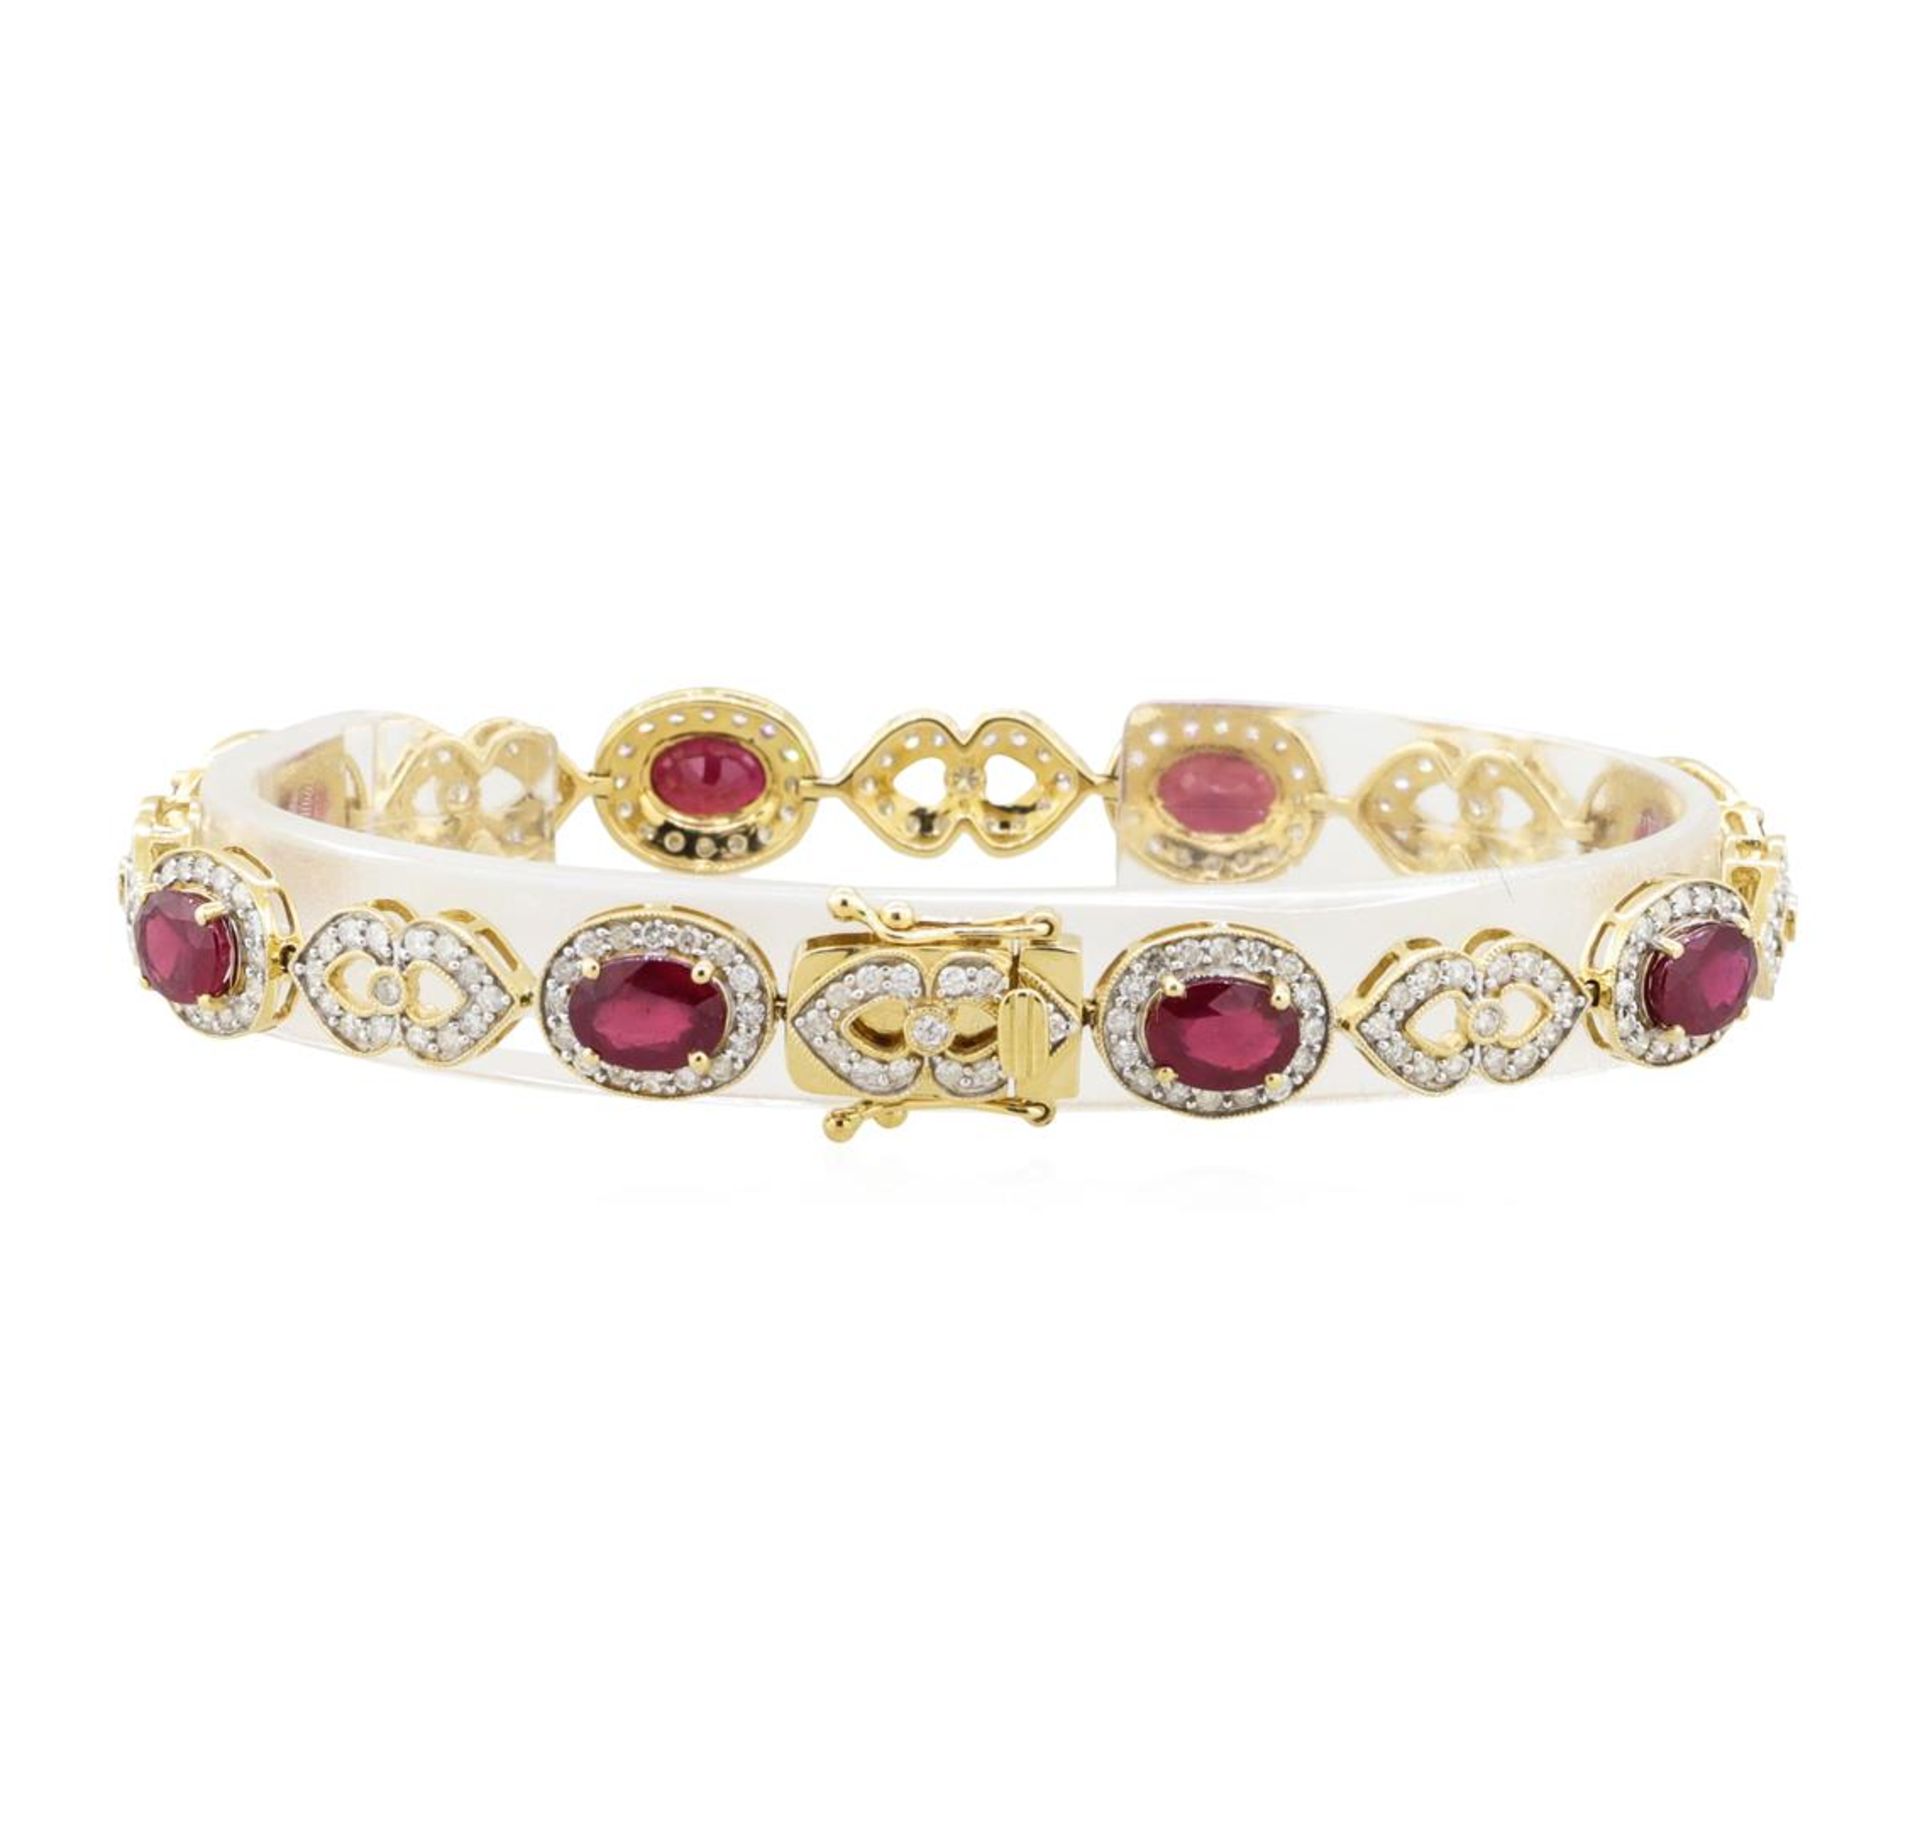 9.32ctw Ruby and Diamond Bracelet - 14KT Yellow Gold - Image 2 of 3